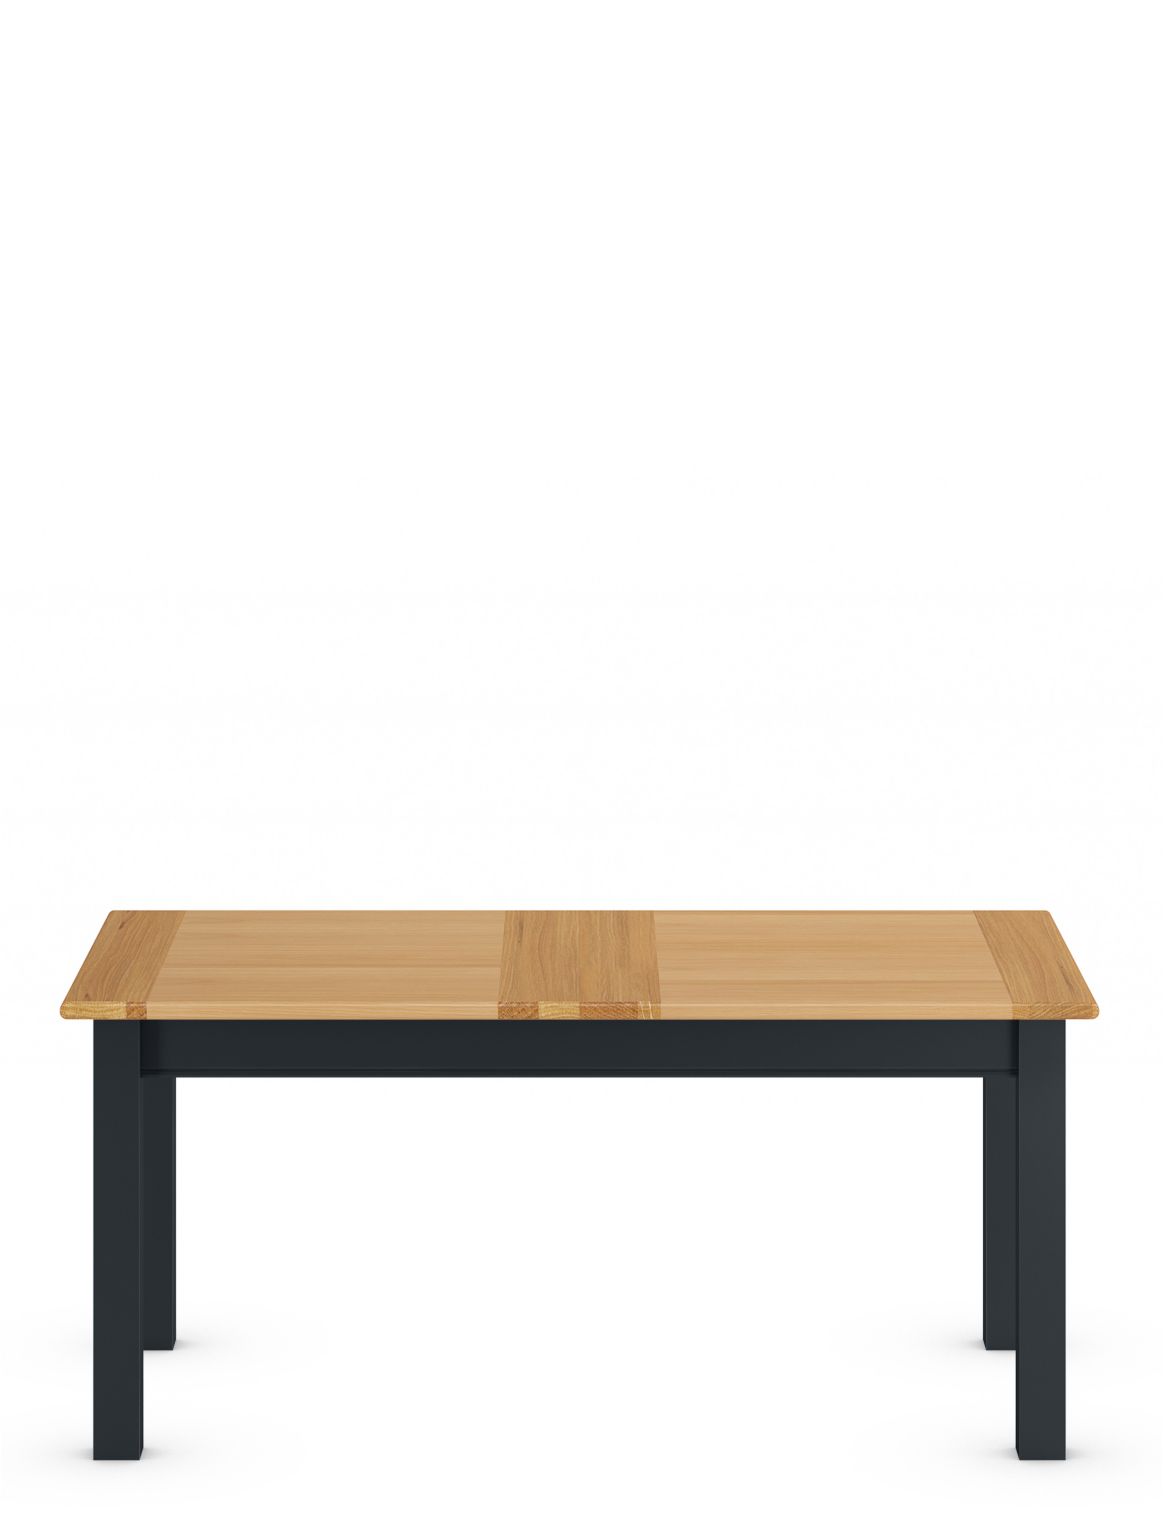 Padstow Extending Dining Table blue